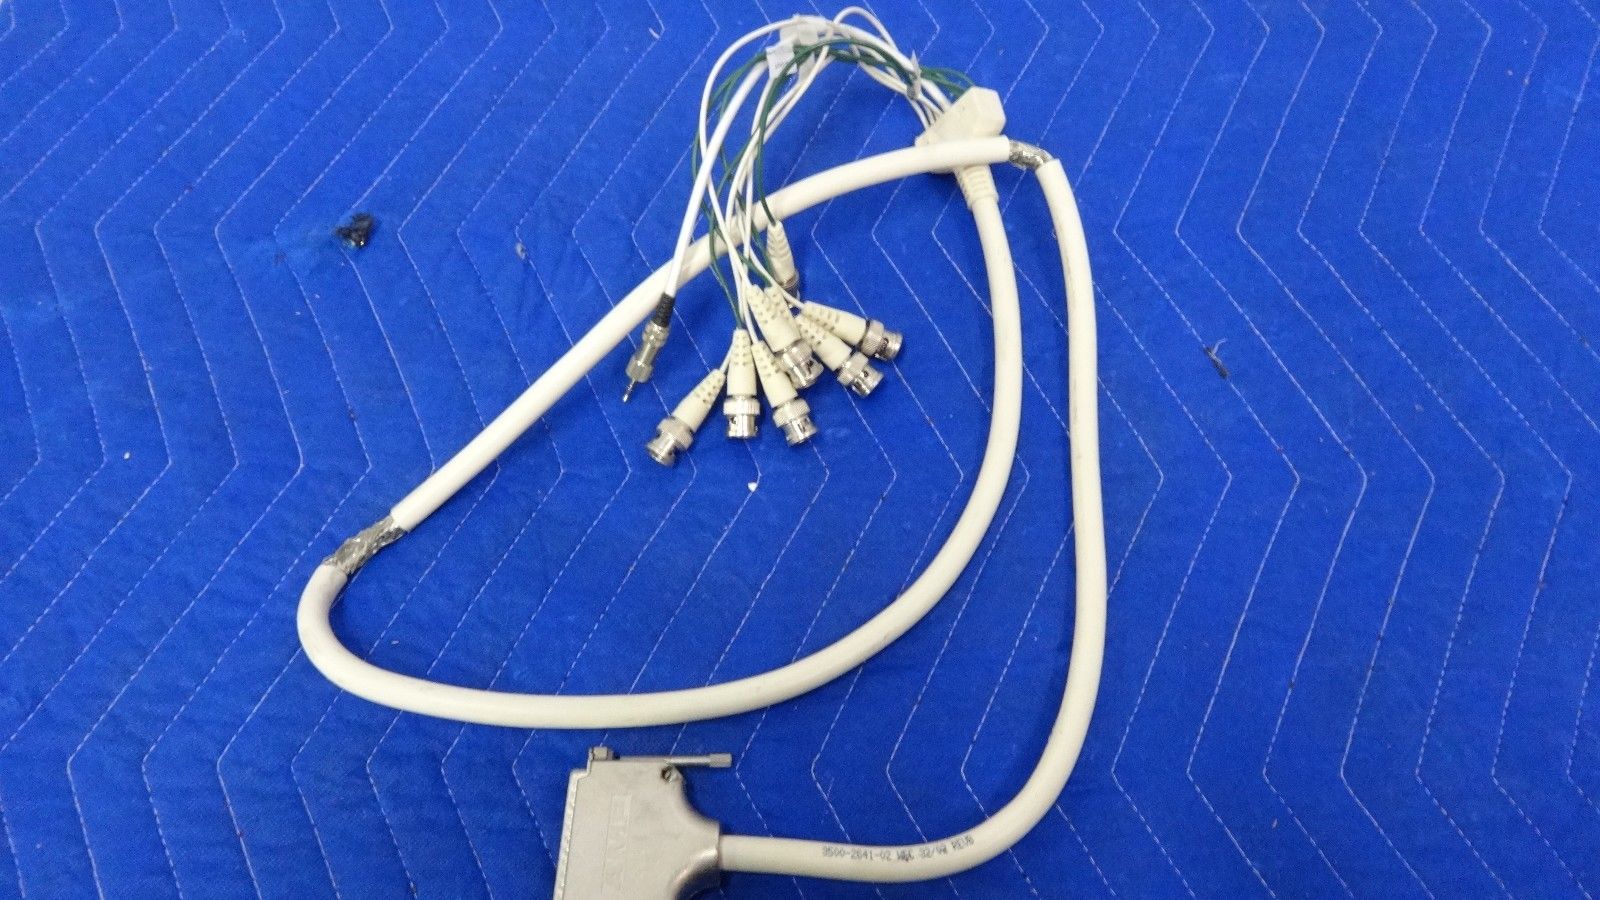 a white cord connected to a power cord on a blue surface